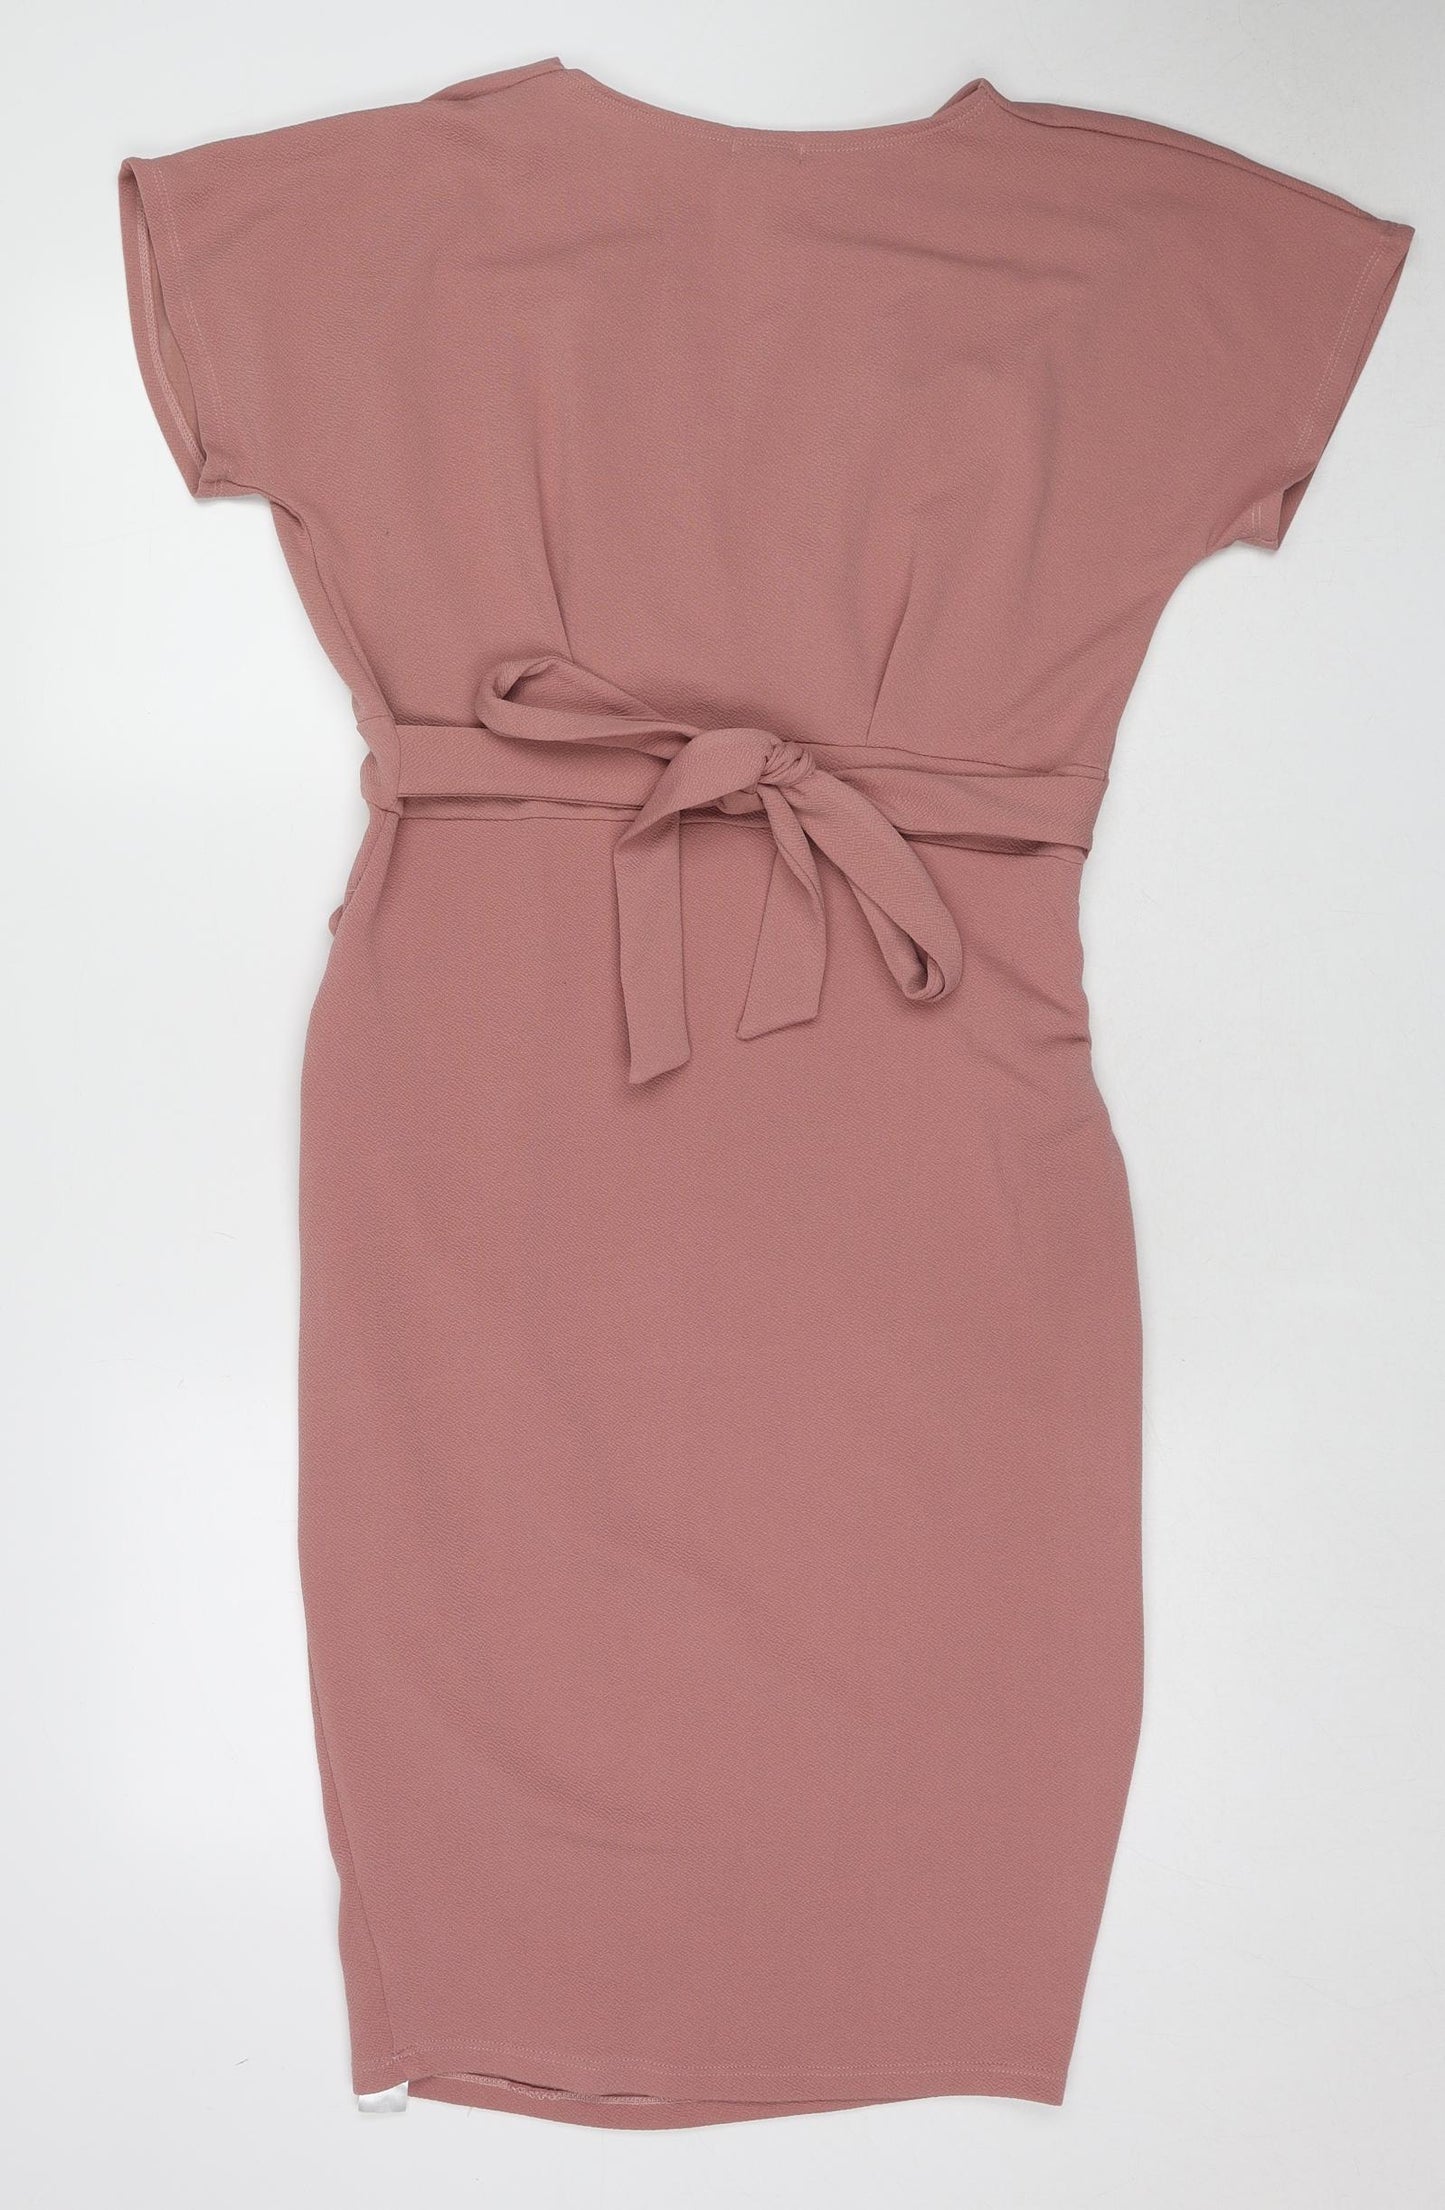 Boohoo Womens Pink Polyester Pencil Dress Size 12 V-Neck Pullover